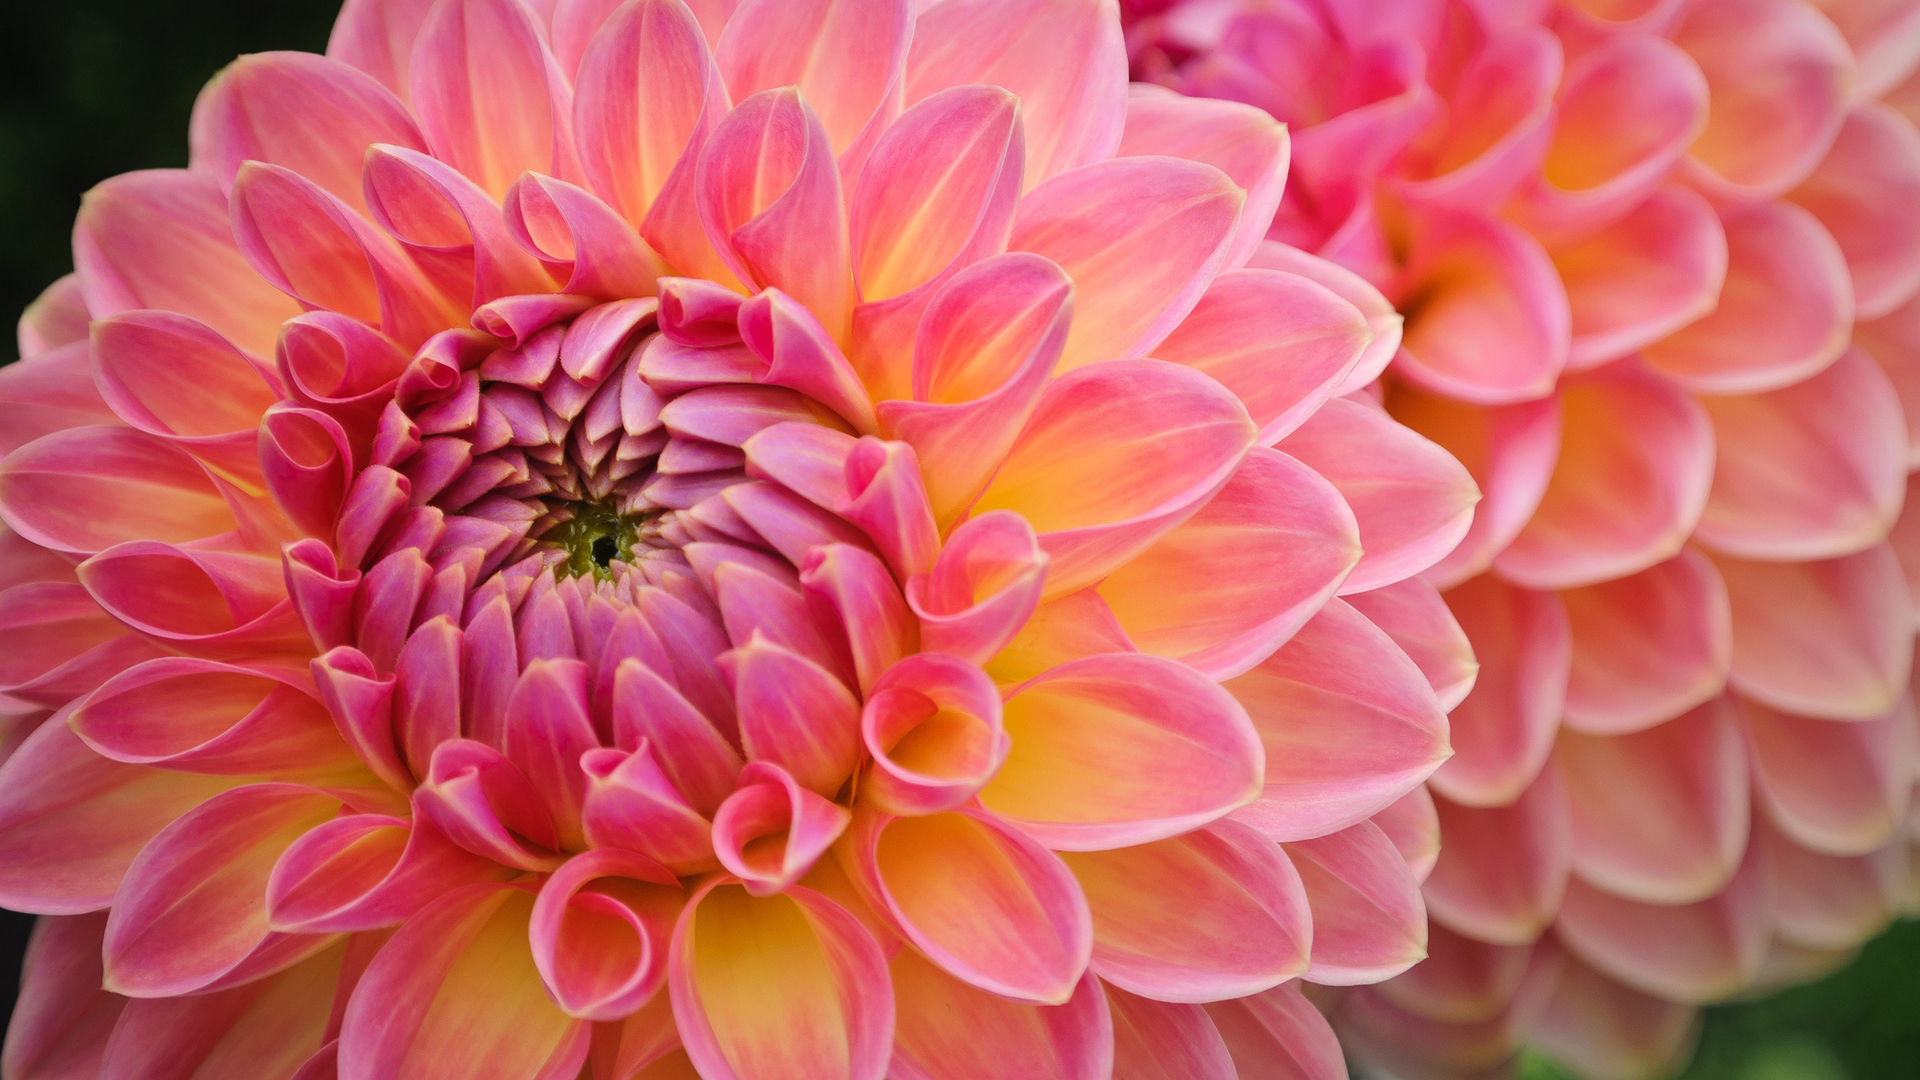 Download Dahlia wallpapers for mobile phone free Dahlia HD pictures